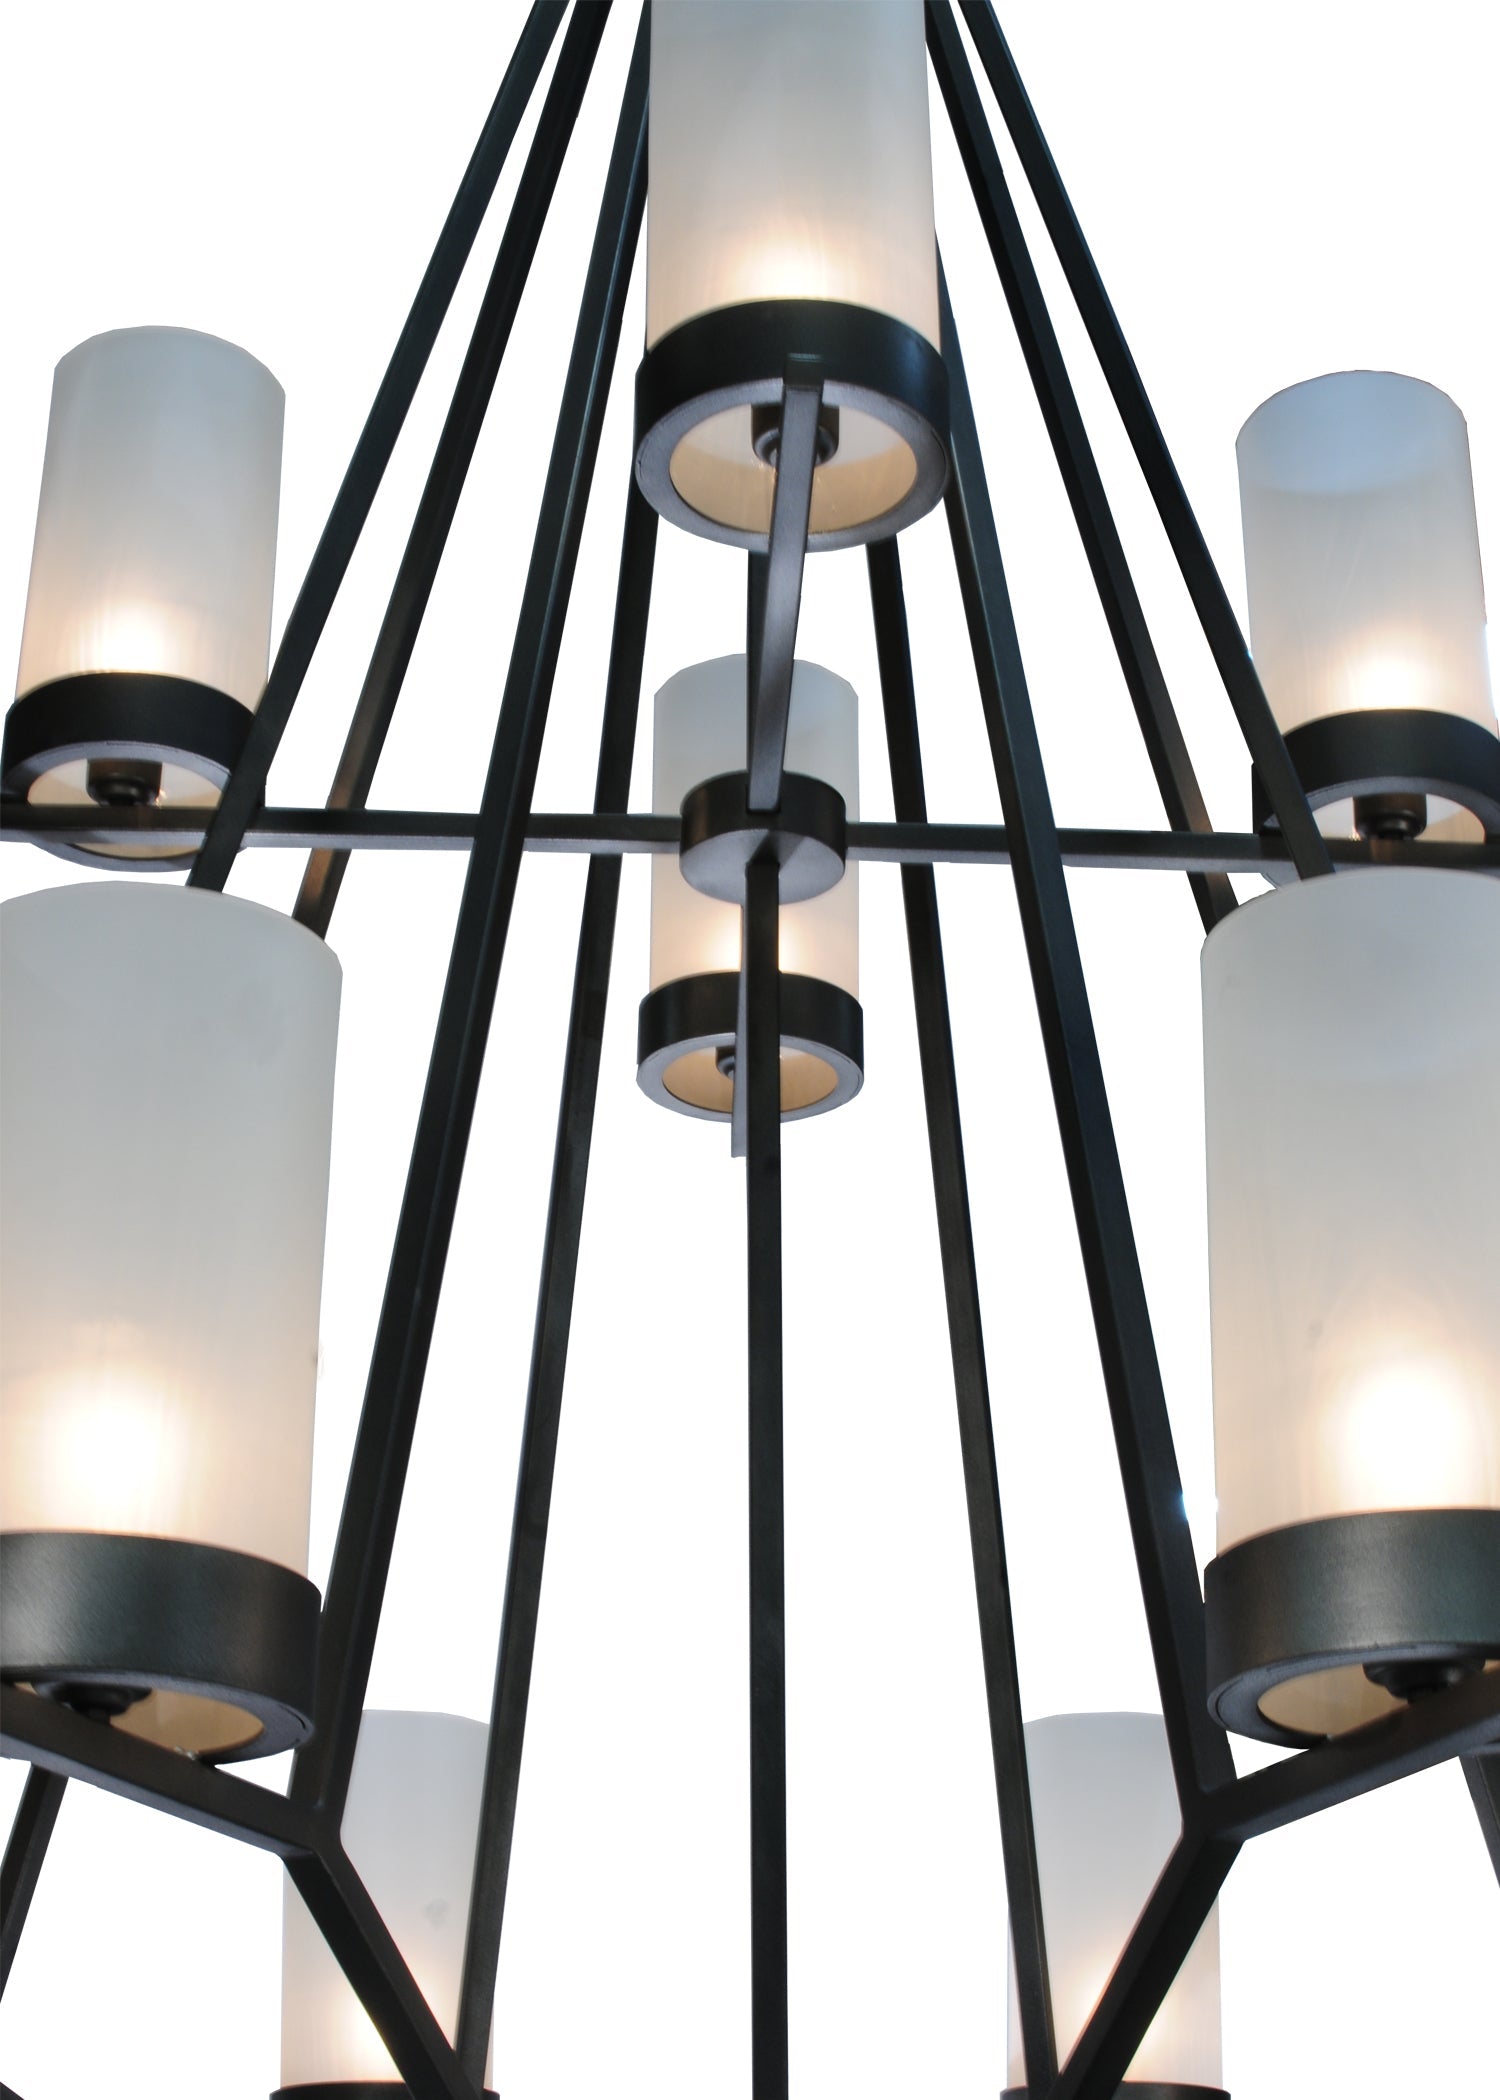 60" Galen 12-Light Two Tier Chandelier by 2nd Ave Lighting